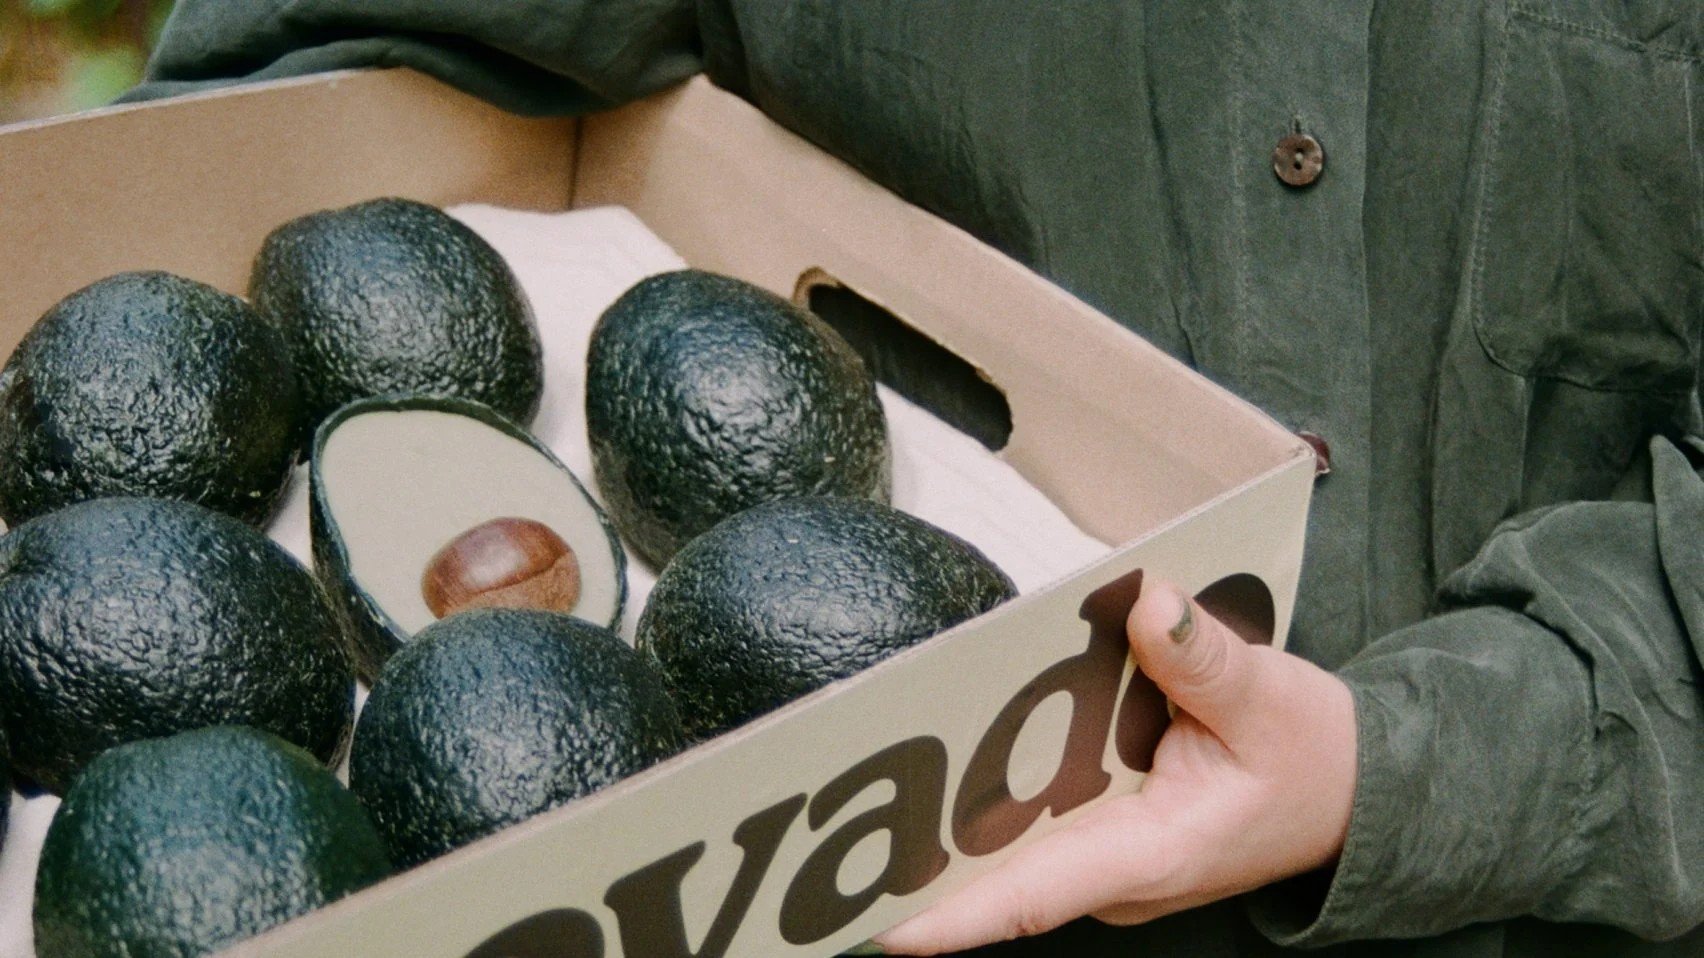 A low-impact alternative to "unsustainable" avocados features in today's Dezeen Agenda newsletter